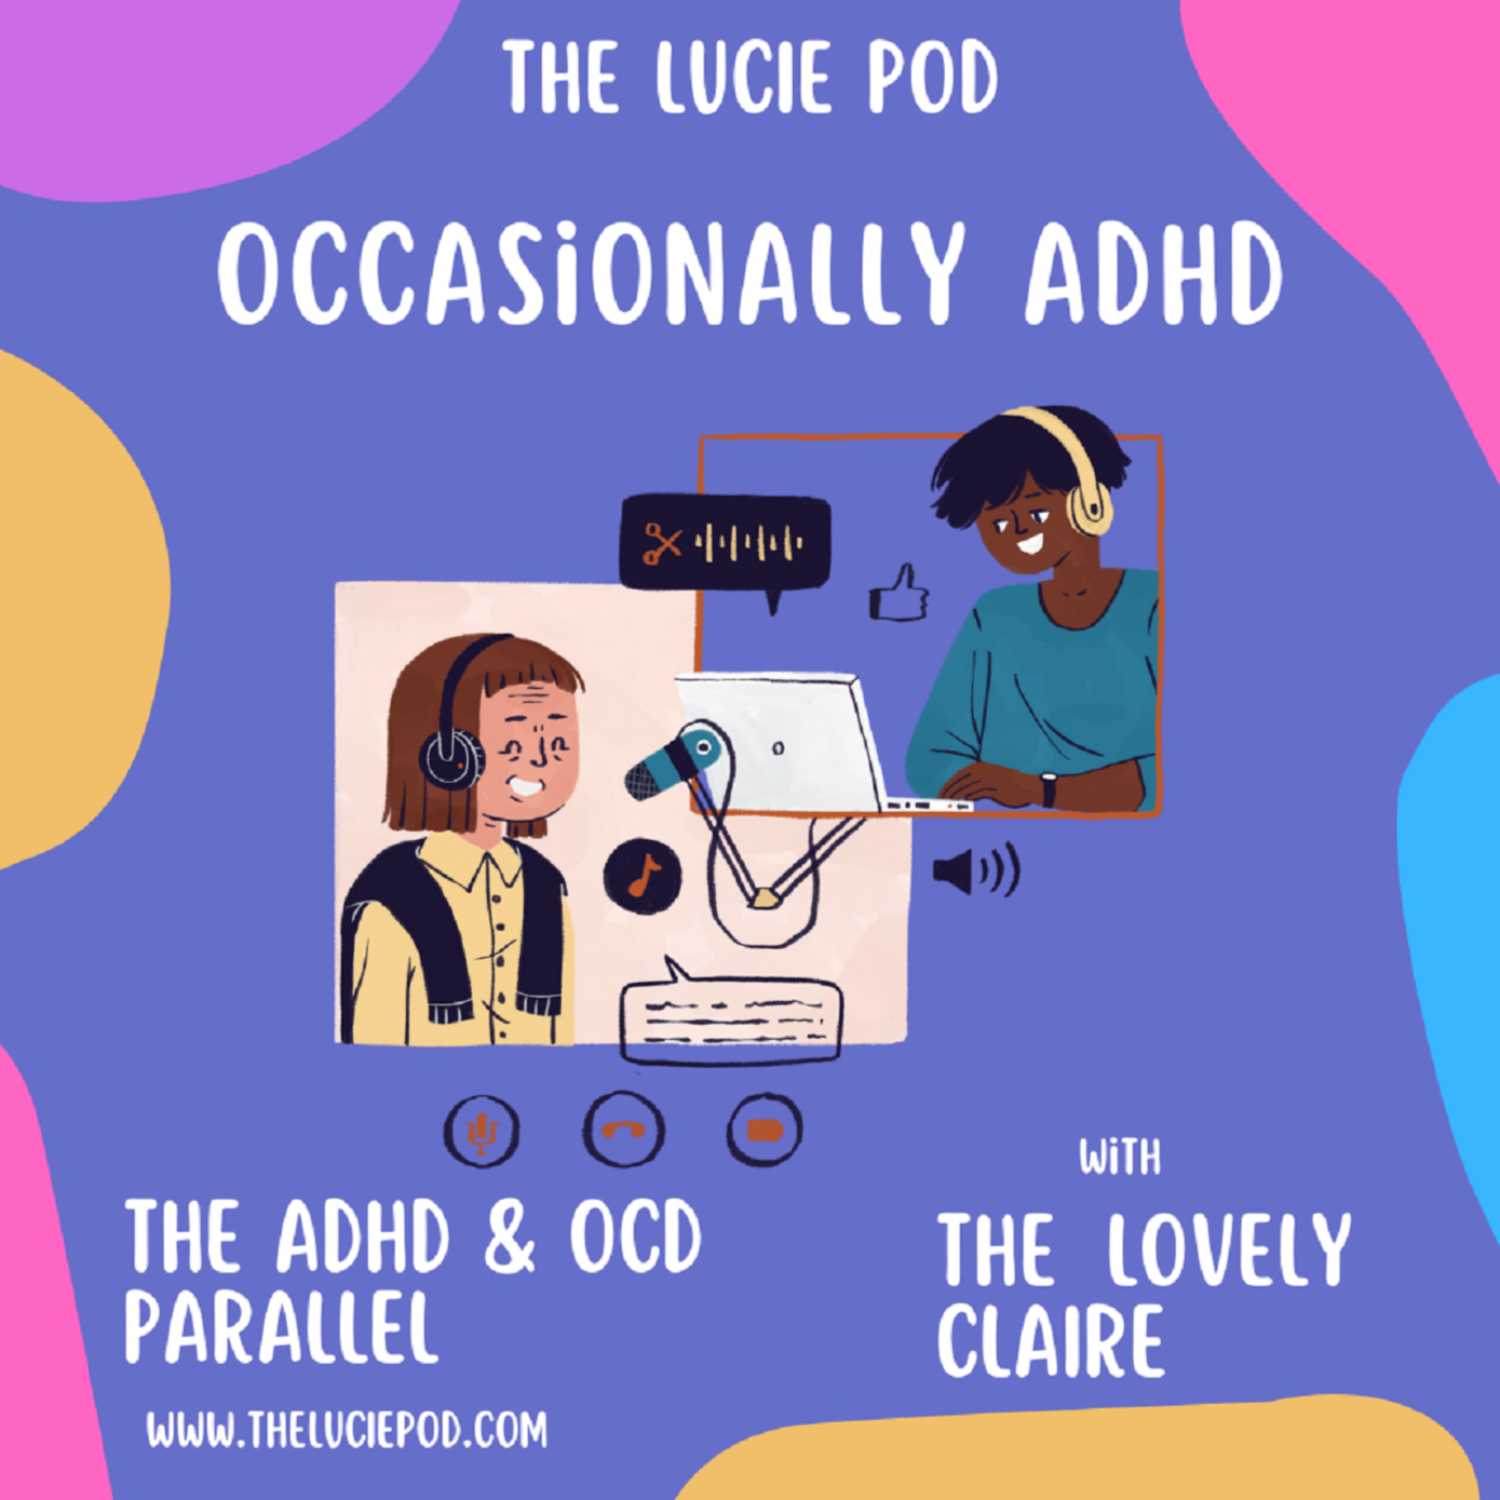 Part 1- Occasionally ADHD: The ADHD & OCD Parallel